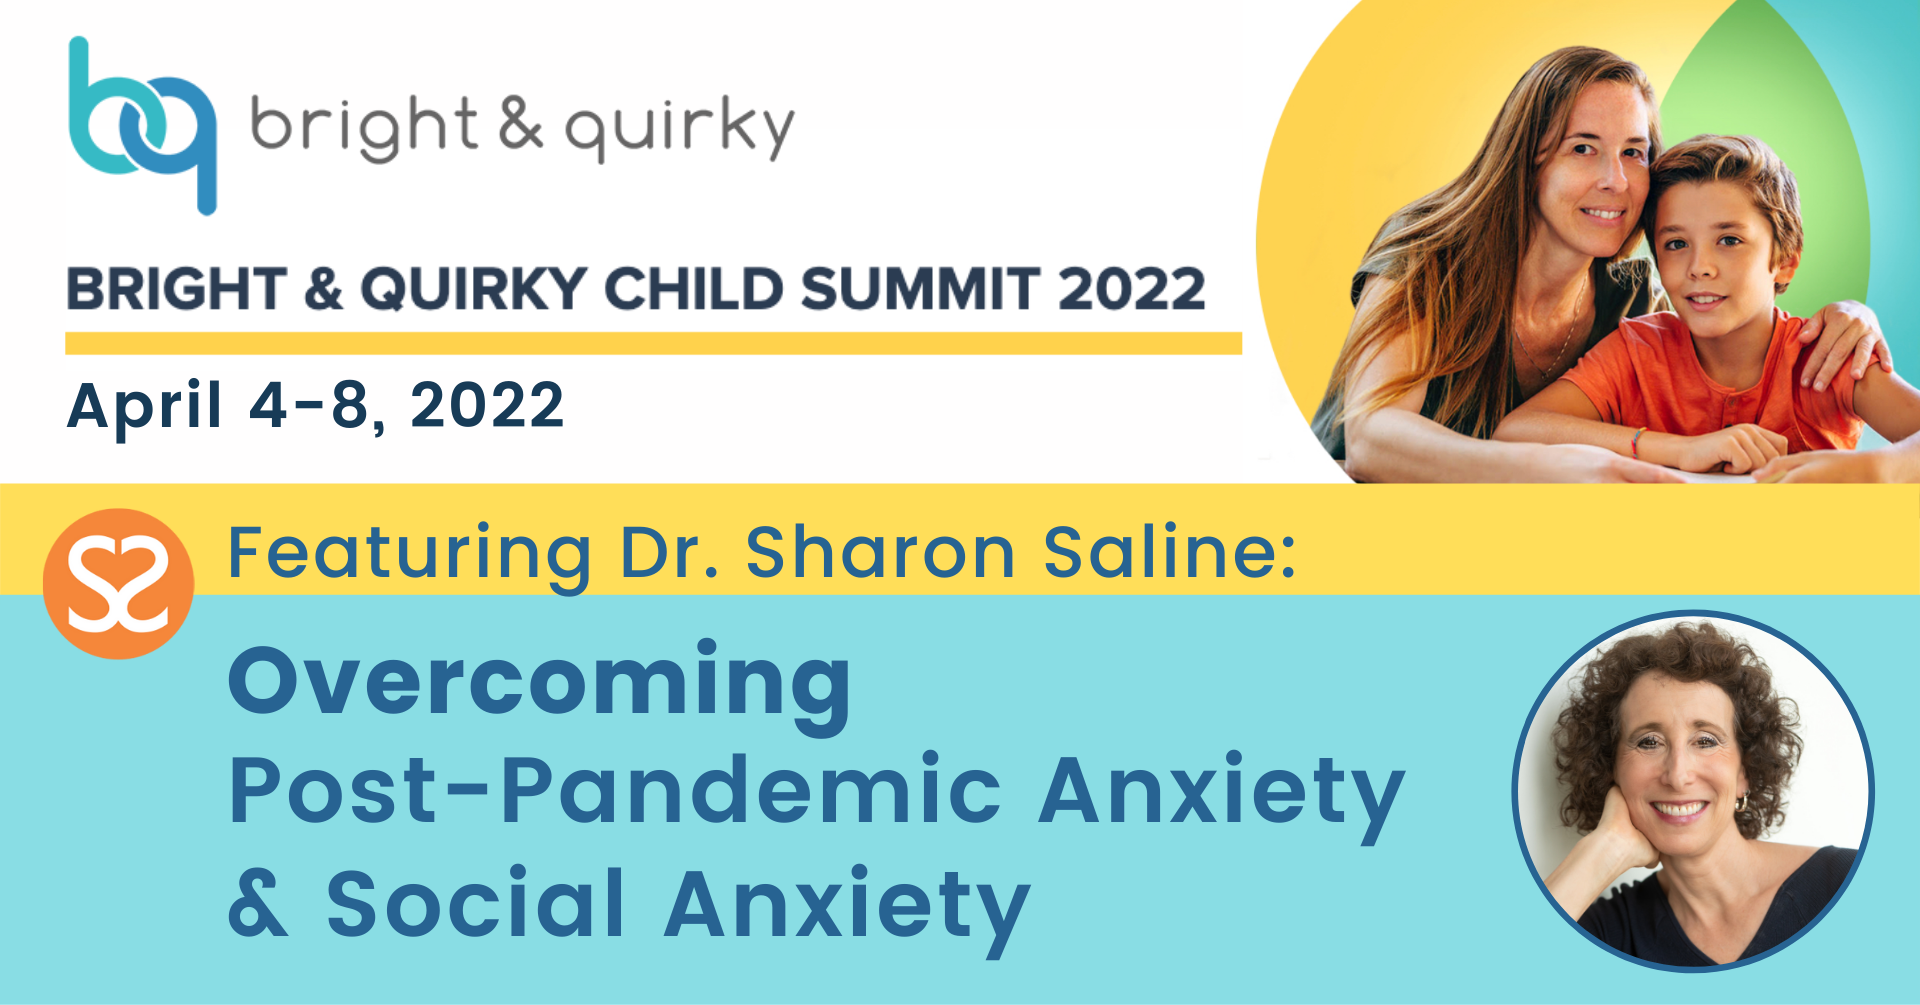 Bright & Quirky Child Summit 2022 Featuring a presentation by Dr. Sharon Saline on April 6th: "Overcoming Post-Pandemic Anxiety & Social Anxiety" Dates: April 4 - 8, 2022